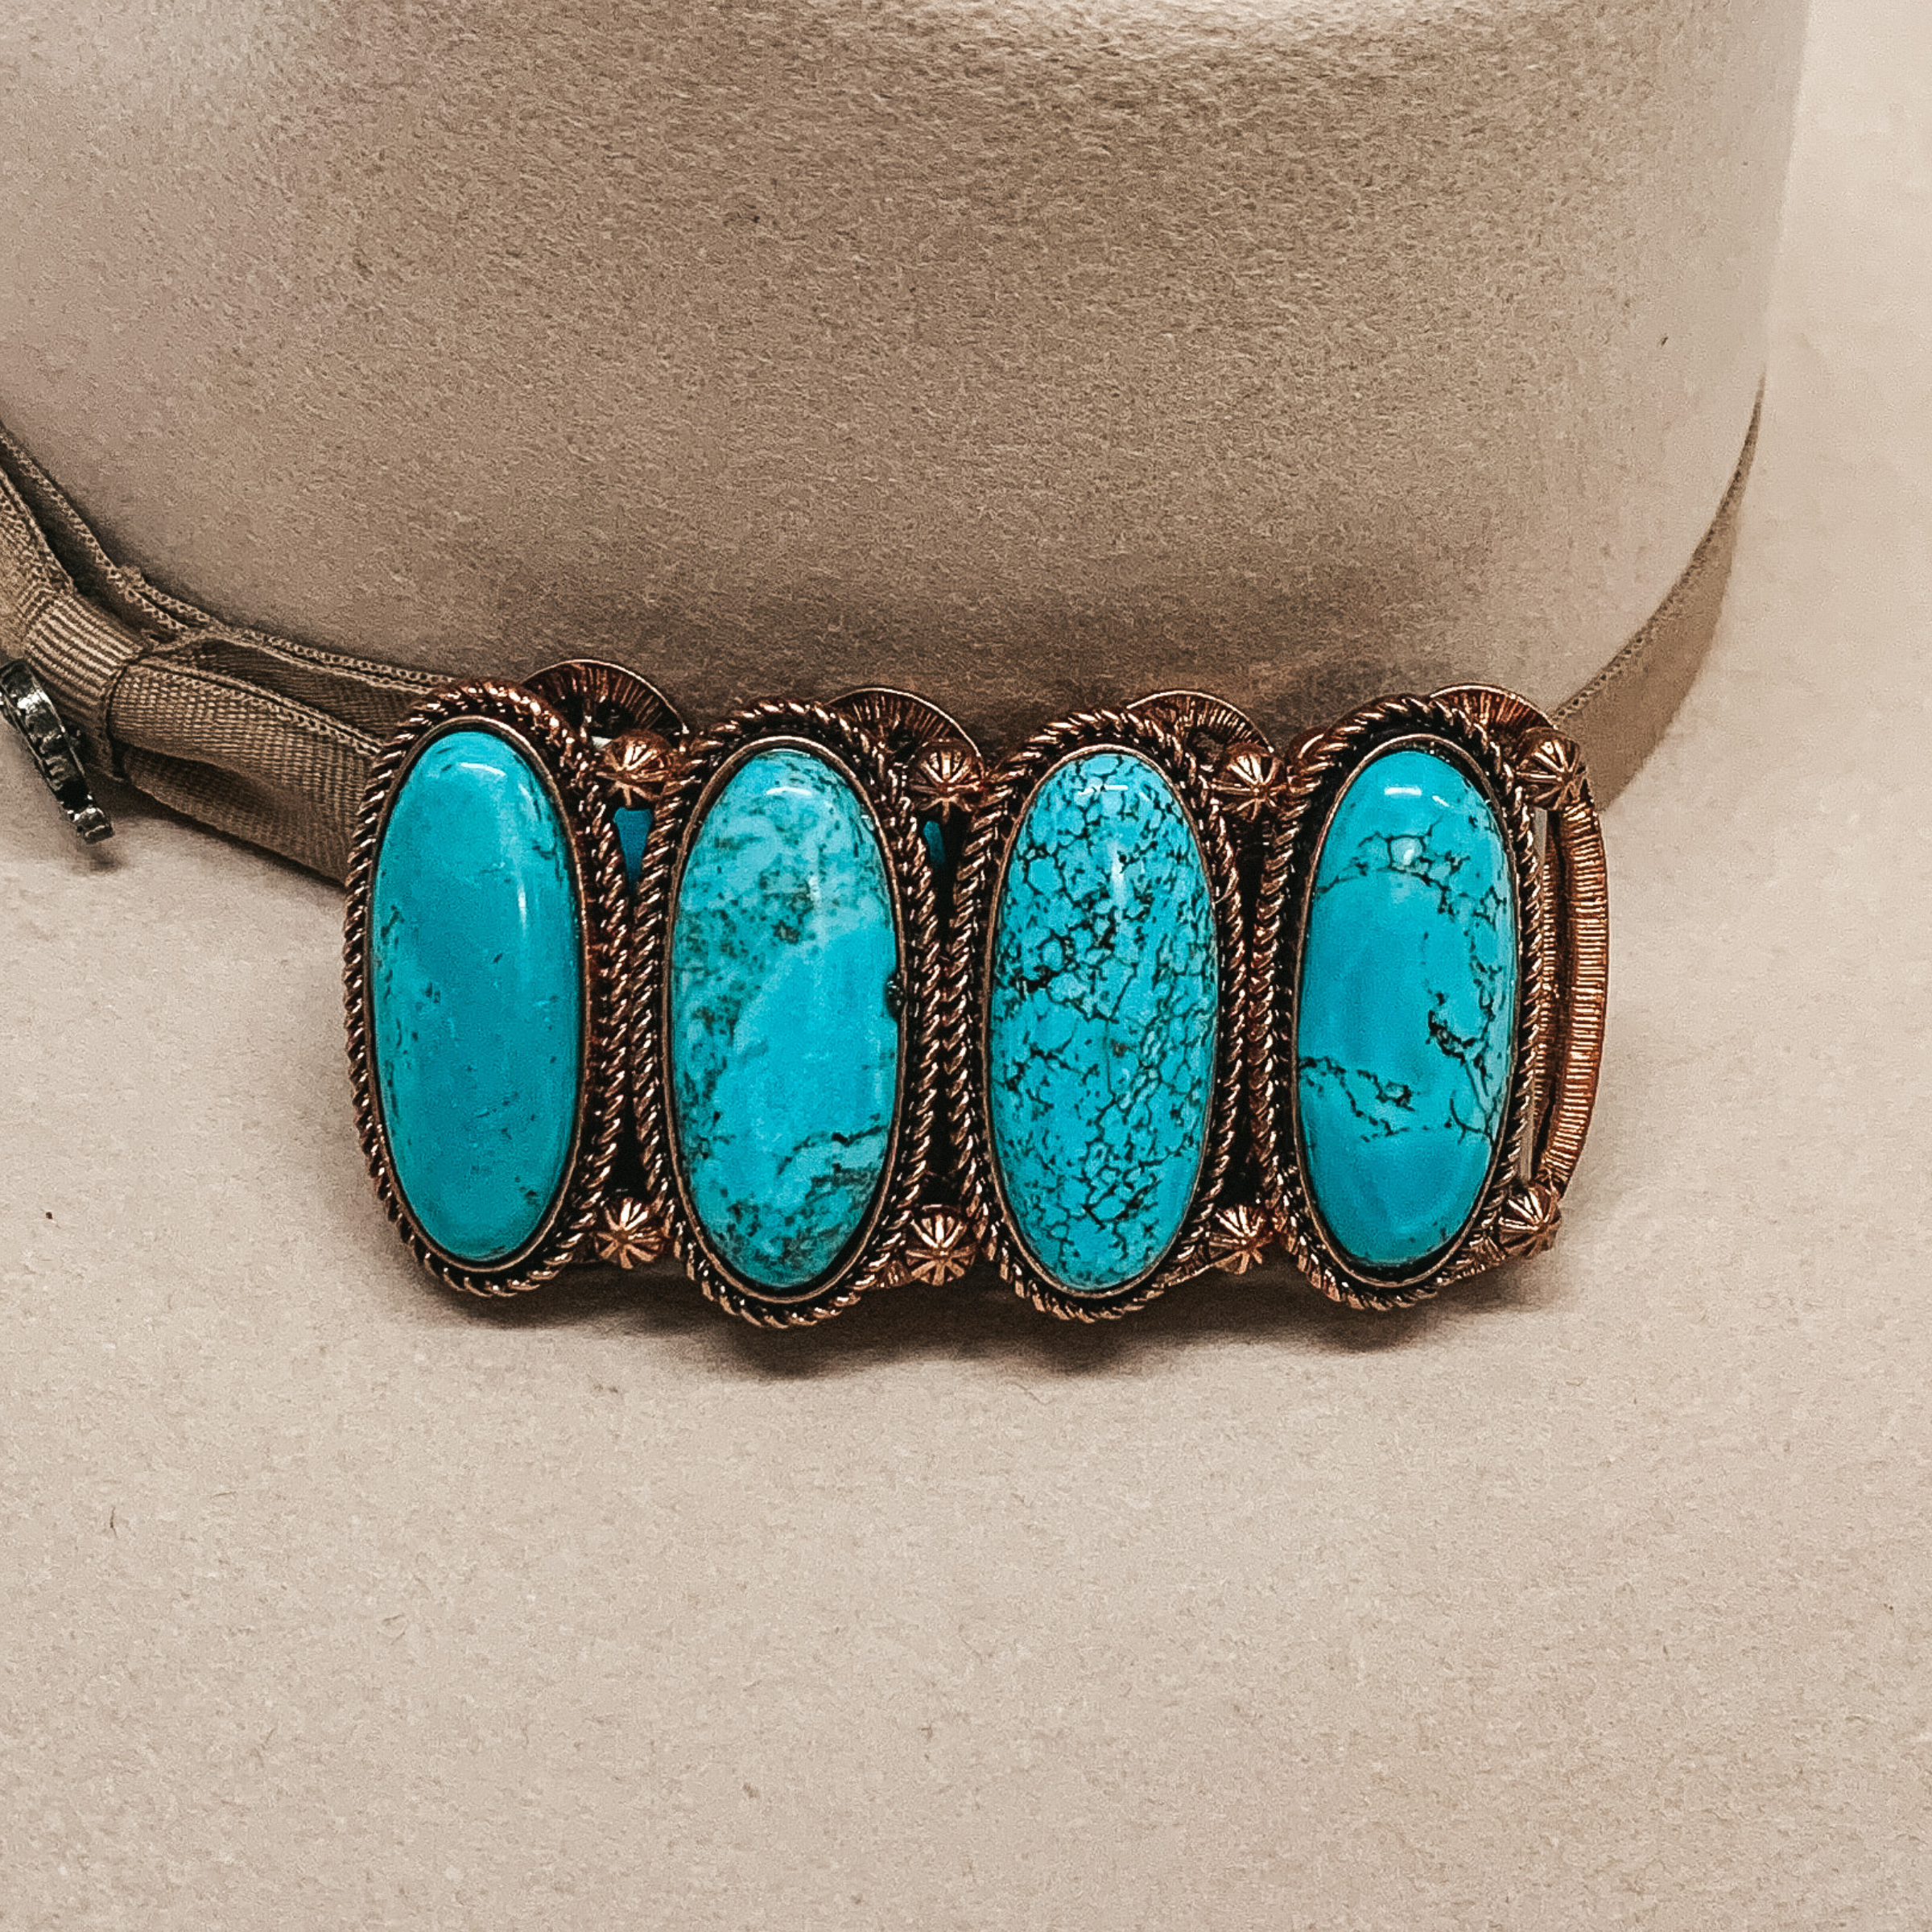 Copper bracelet with big oval turquoise stones pictured laying on a beige background. 